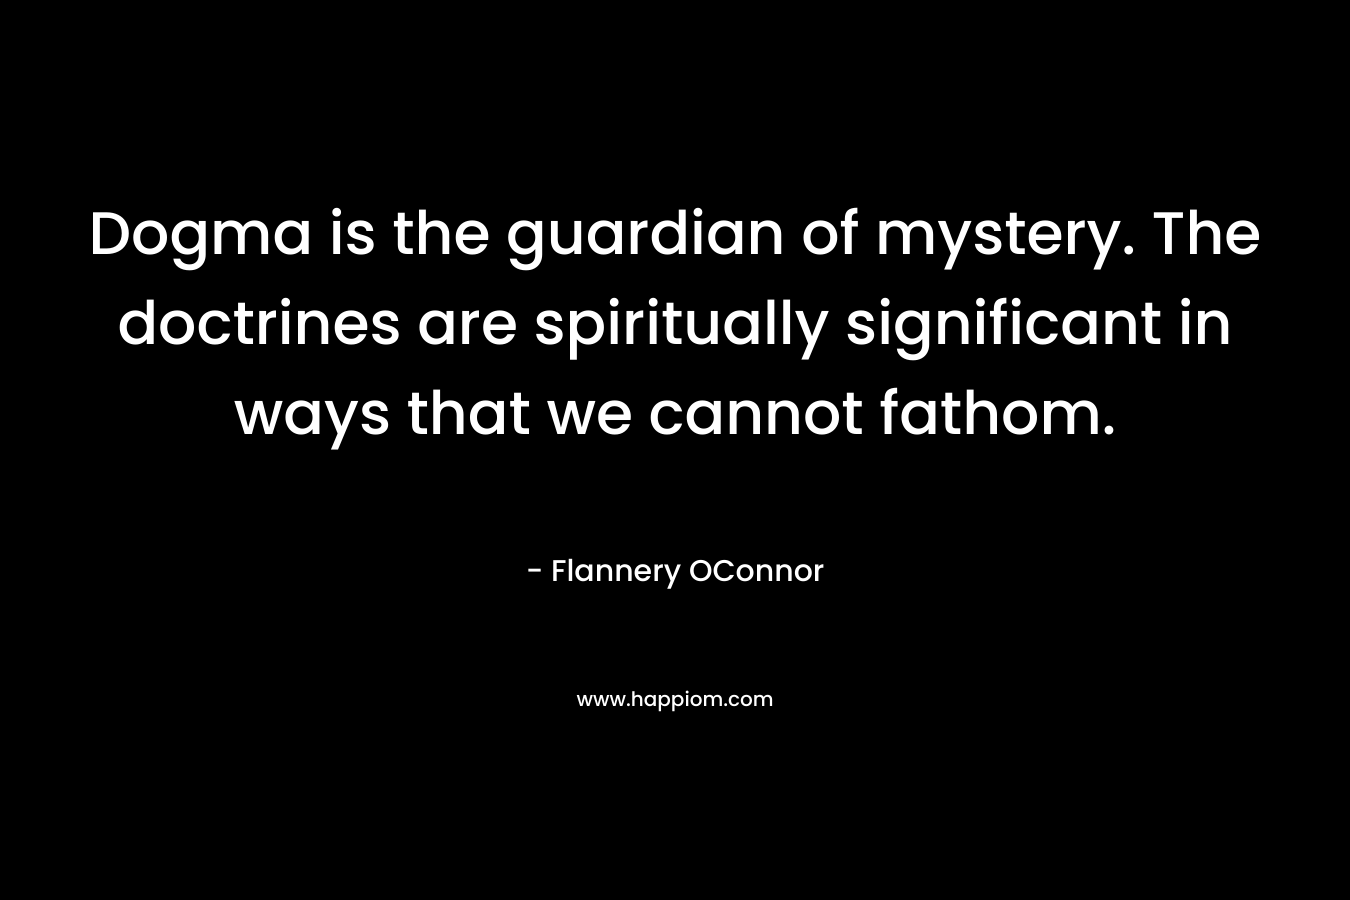 Dogma is the guardian of mystery. The doctrines are spiritually significant in ways that we cannot fathom. – Flannery OConnor